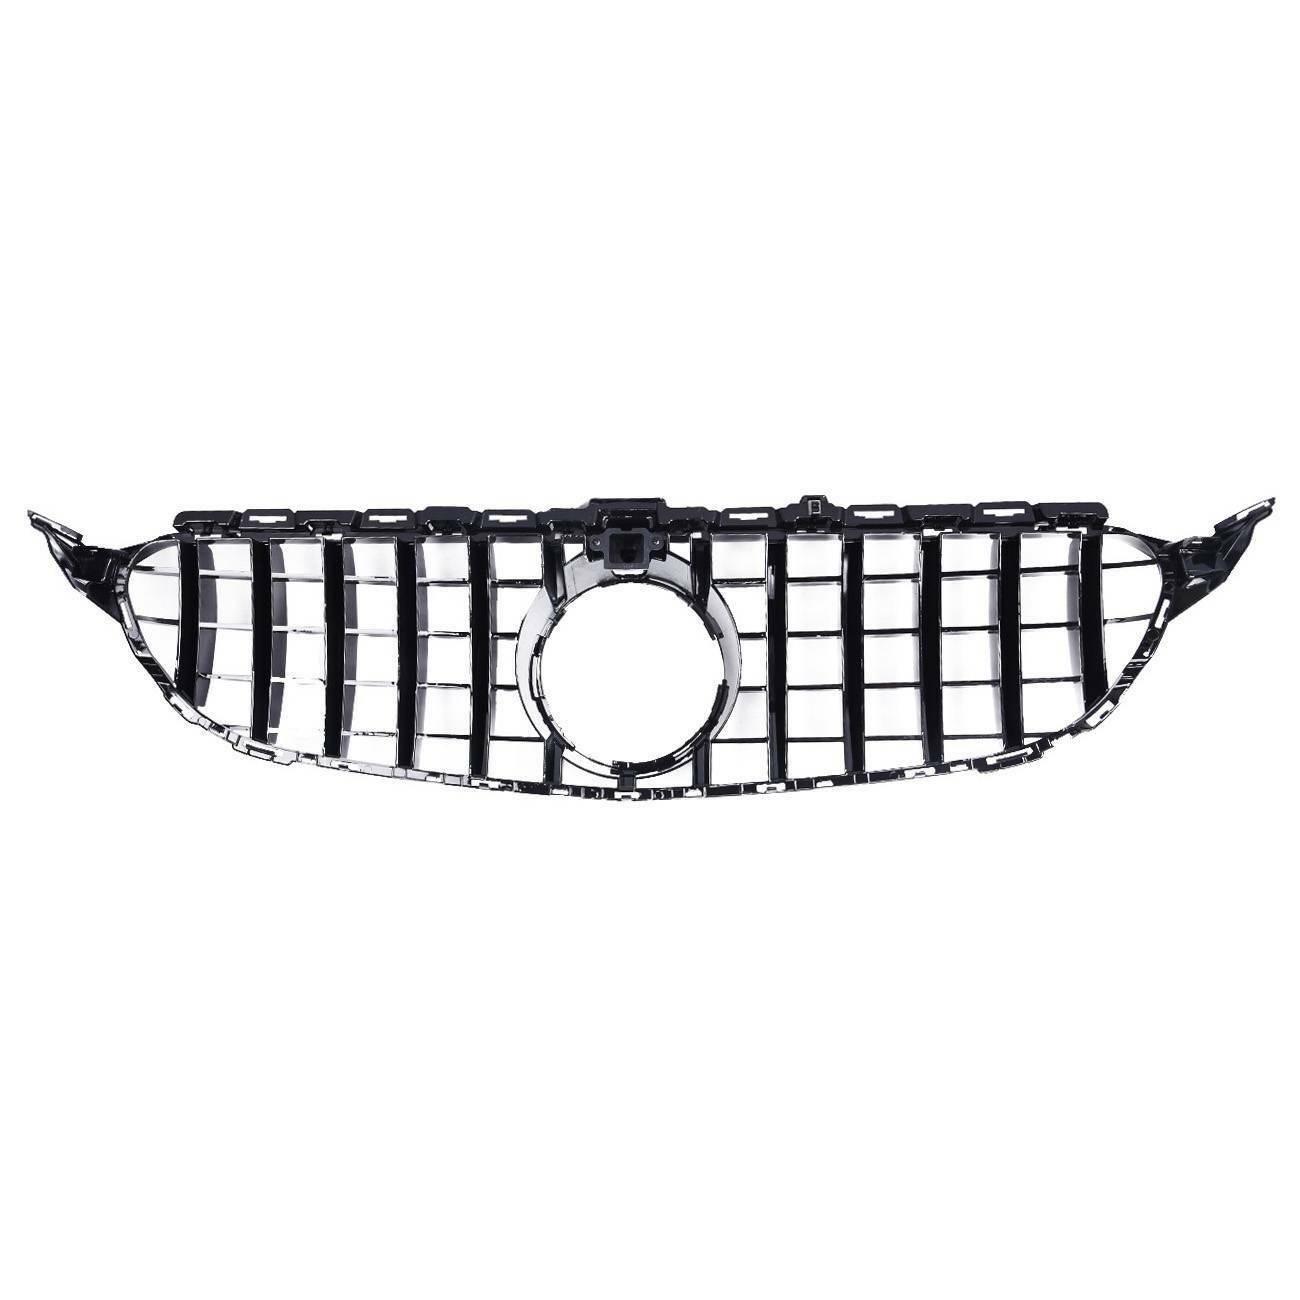 Front Grille Kit for Mercedes W205 S205 C180 C200 C300 W205 C63 AMG 15-18 German Made